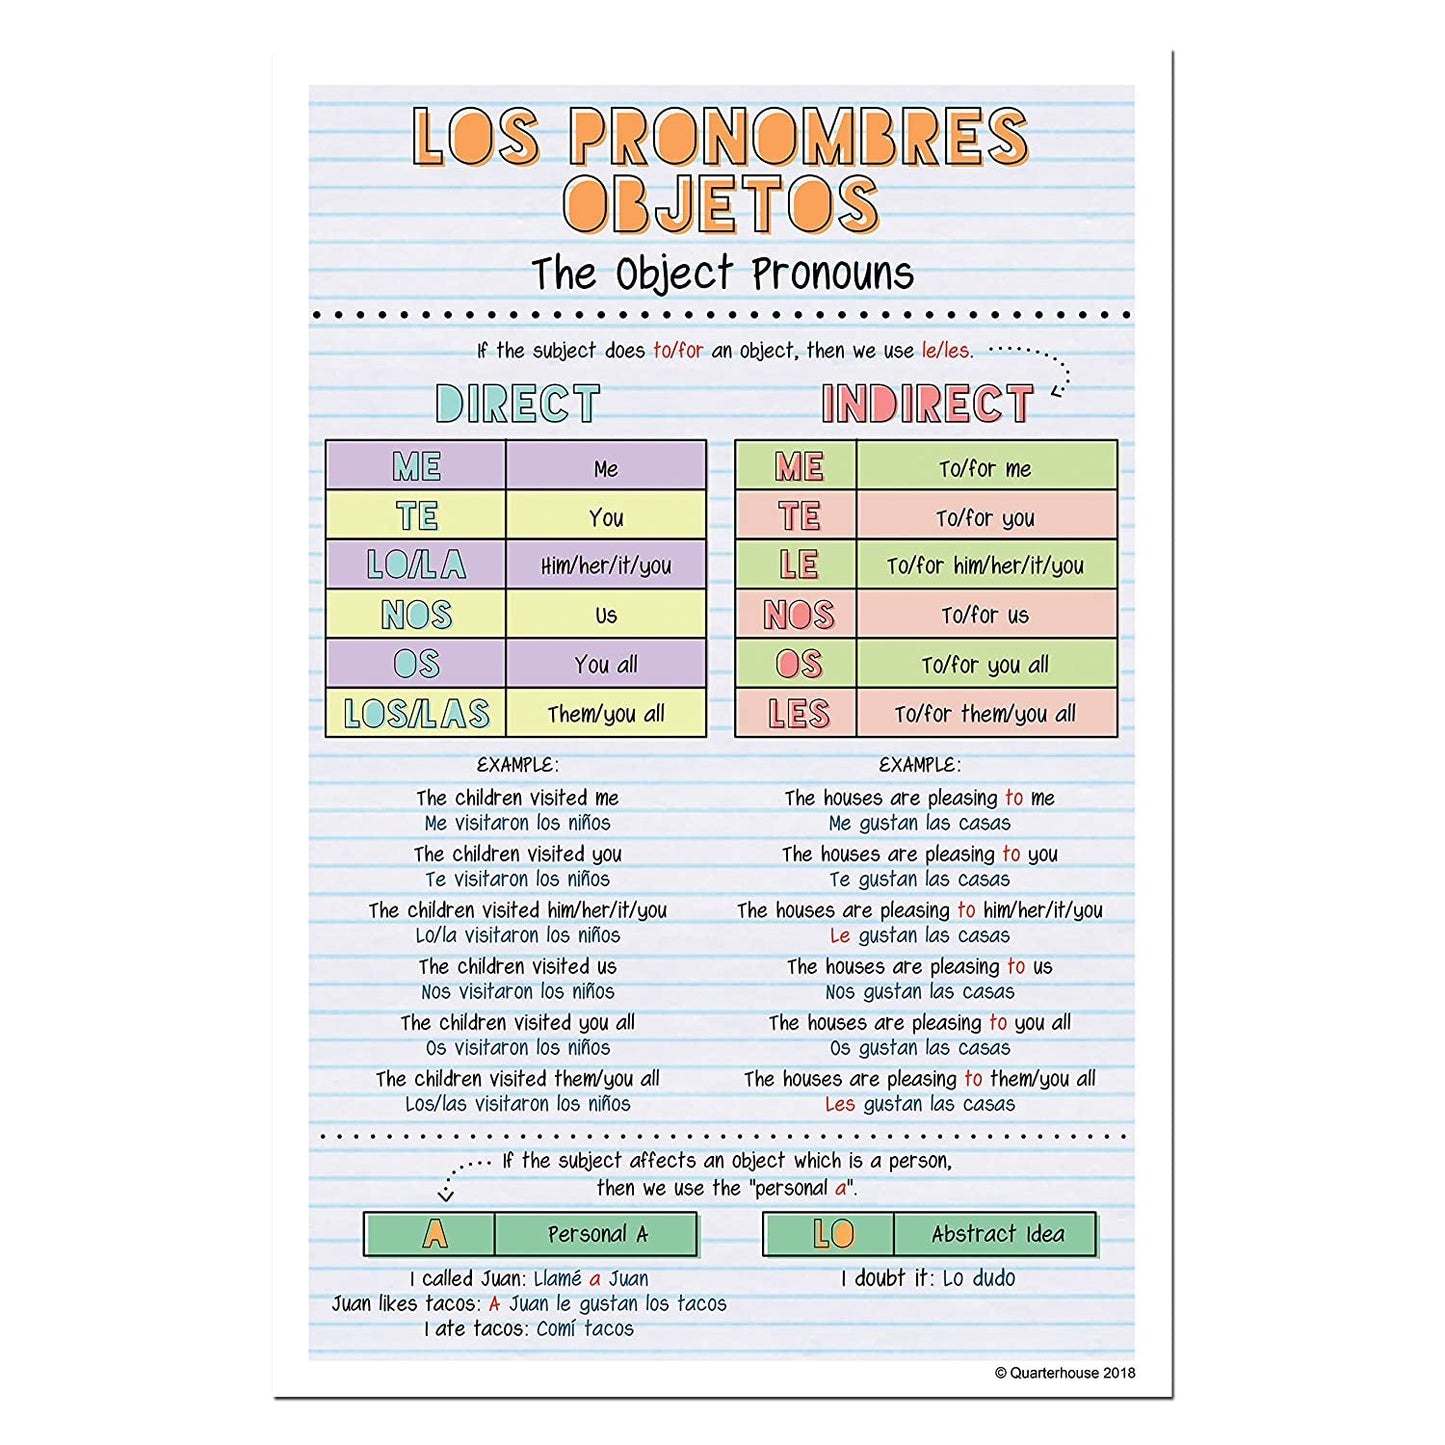 Quarterhouse Spanish Verbs & Beginner Vocabulary (Set G) Poster Set, Spanish Classroom Learning Materials for K-12 Students and Teachers, Set of 11, 12 x 18 Inches, Extra Durable